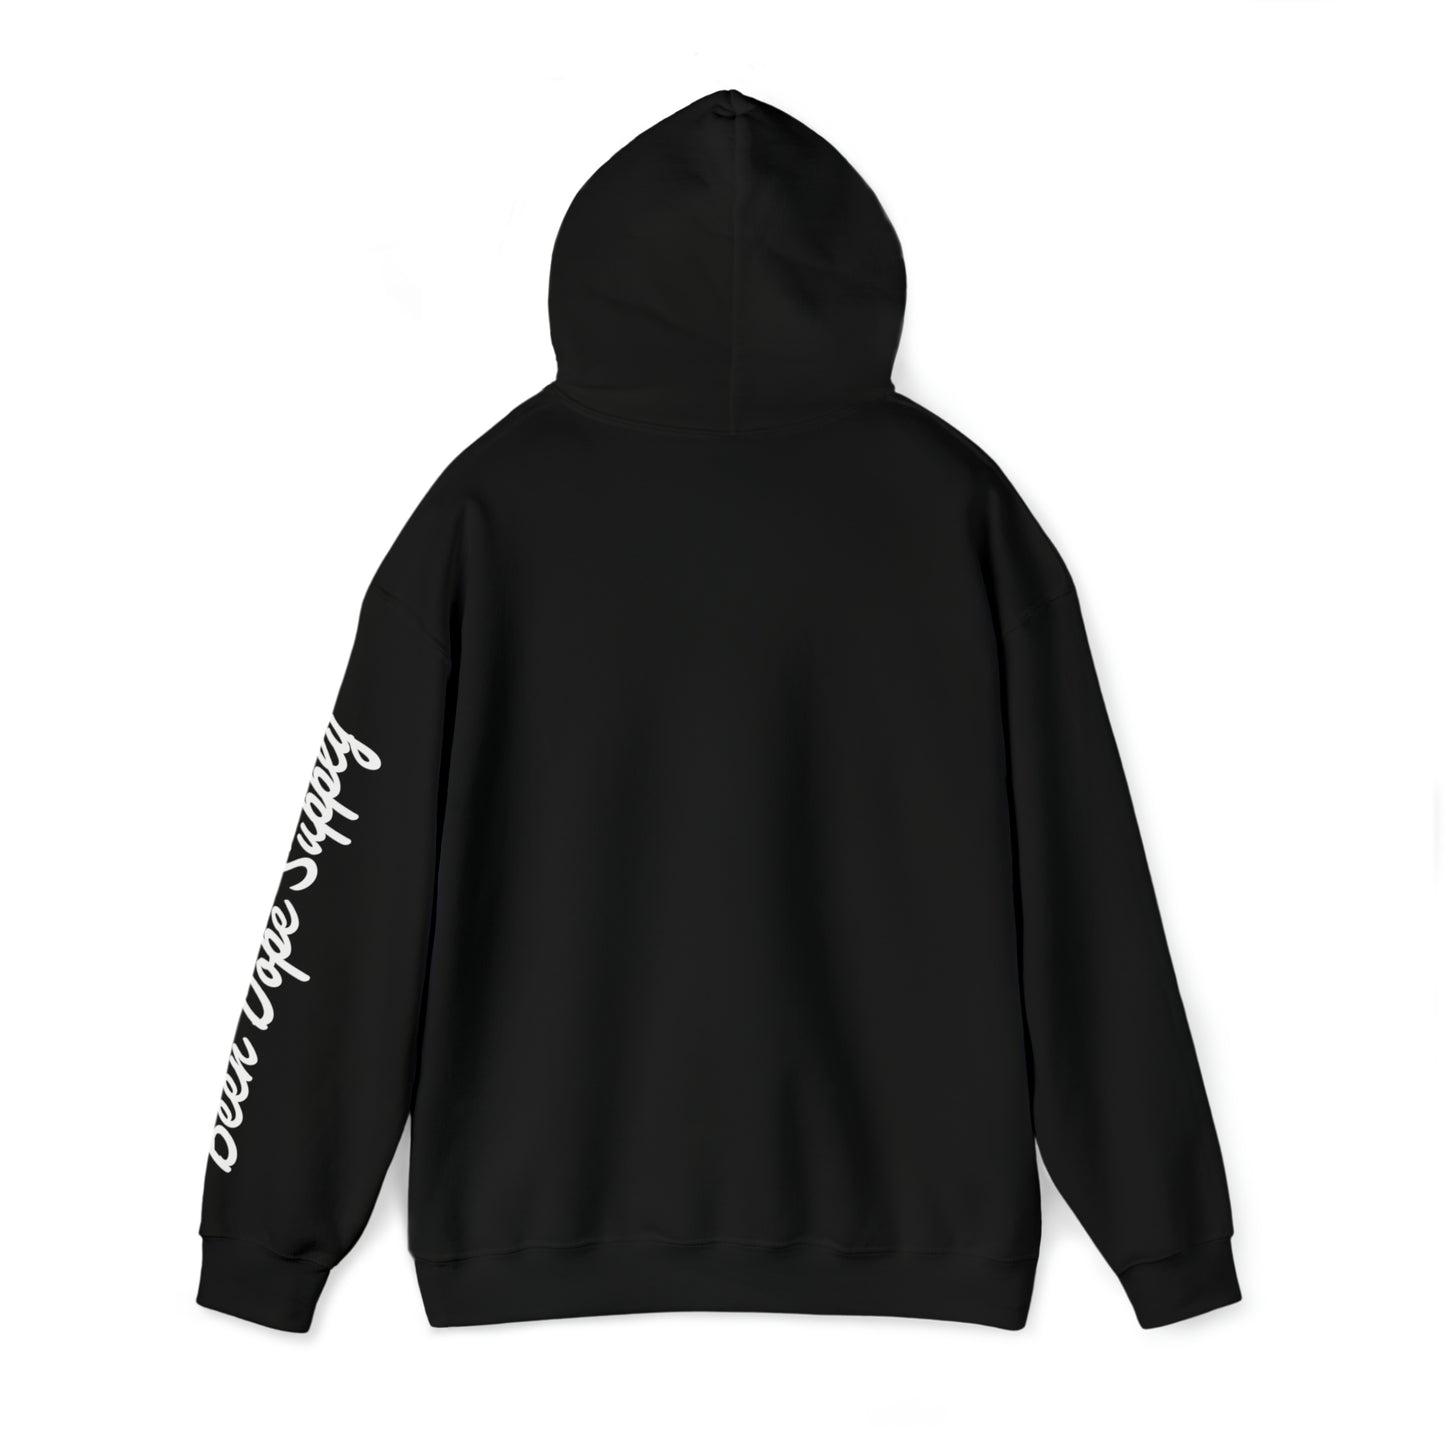 The Ville Mentality | Black Graphic Hoodie